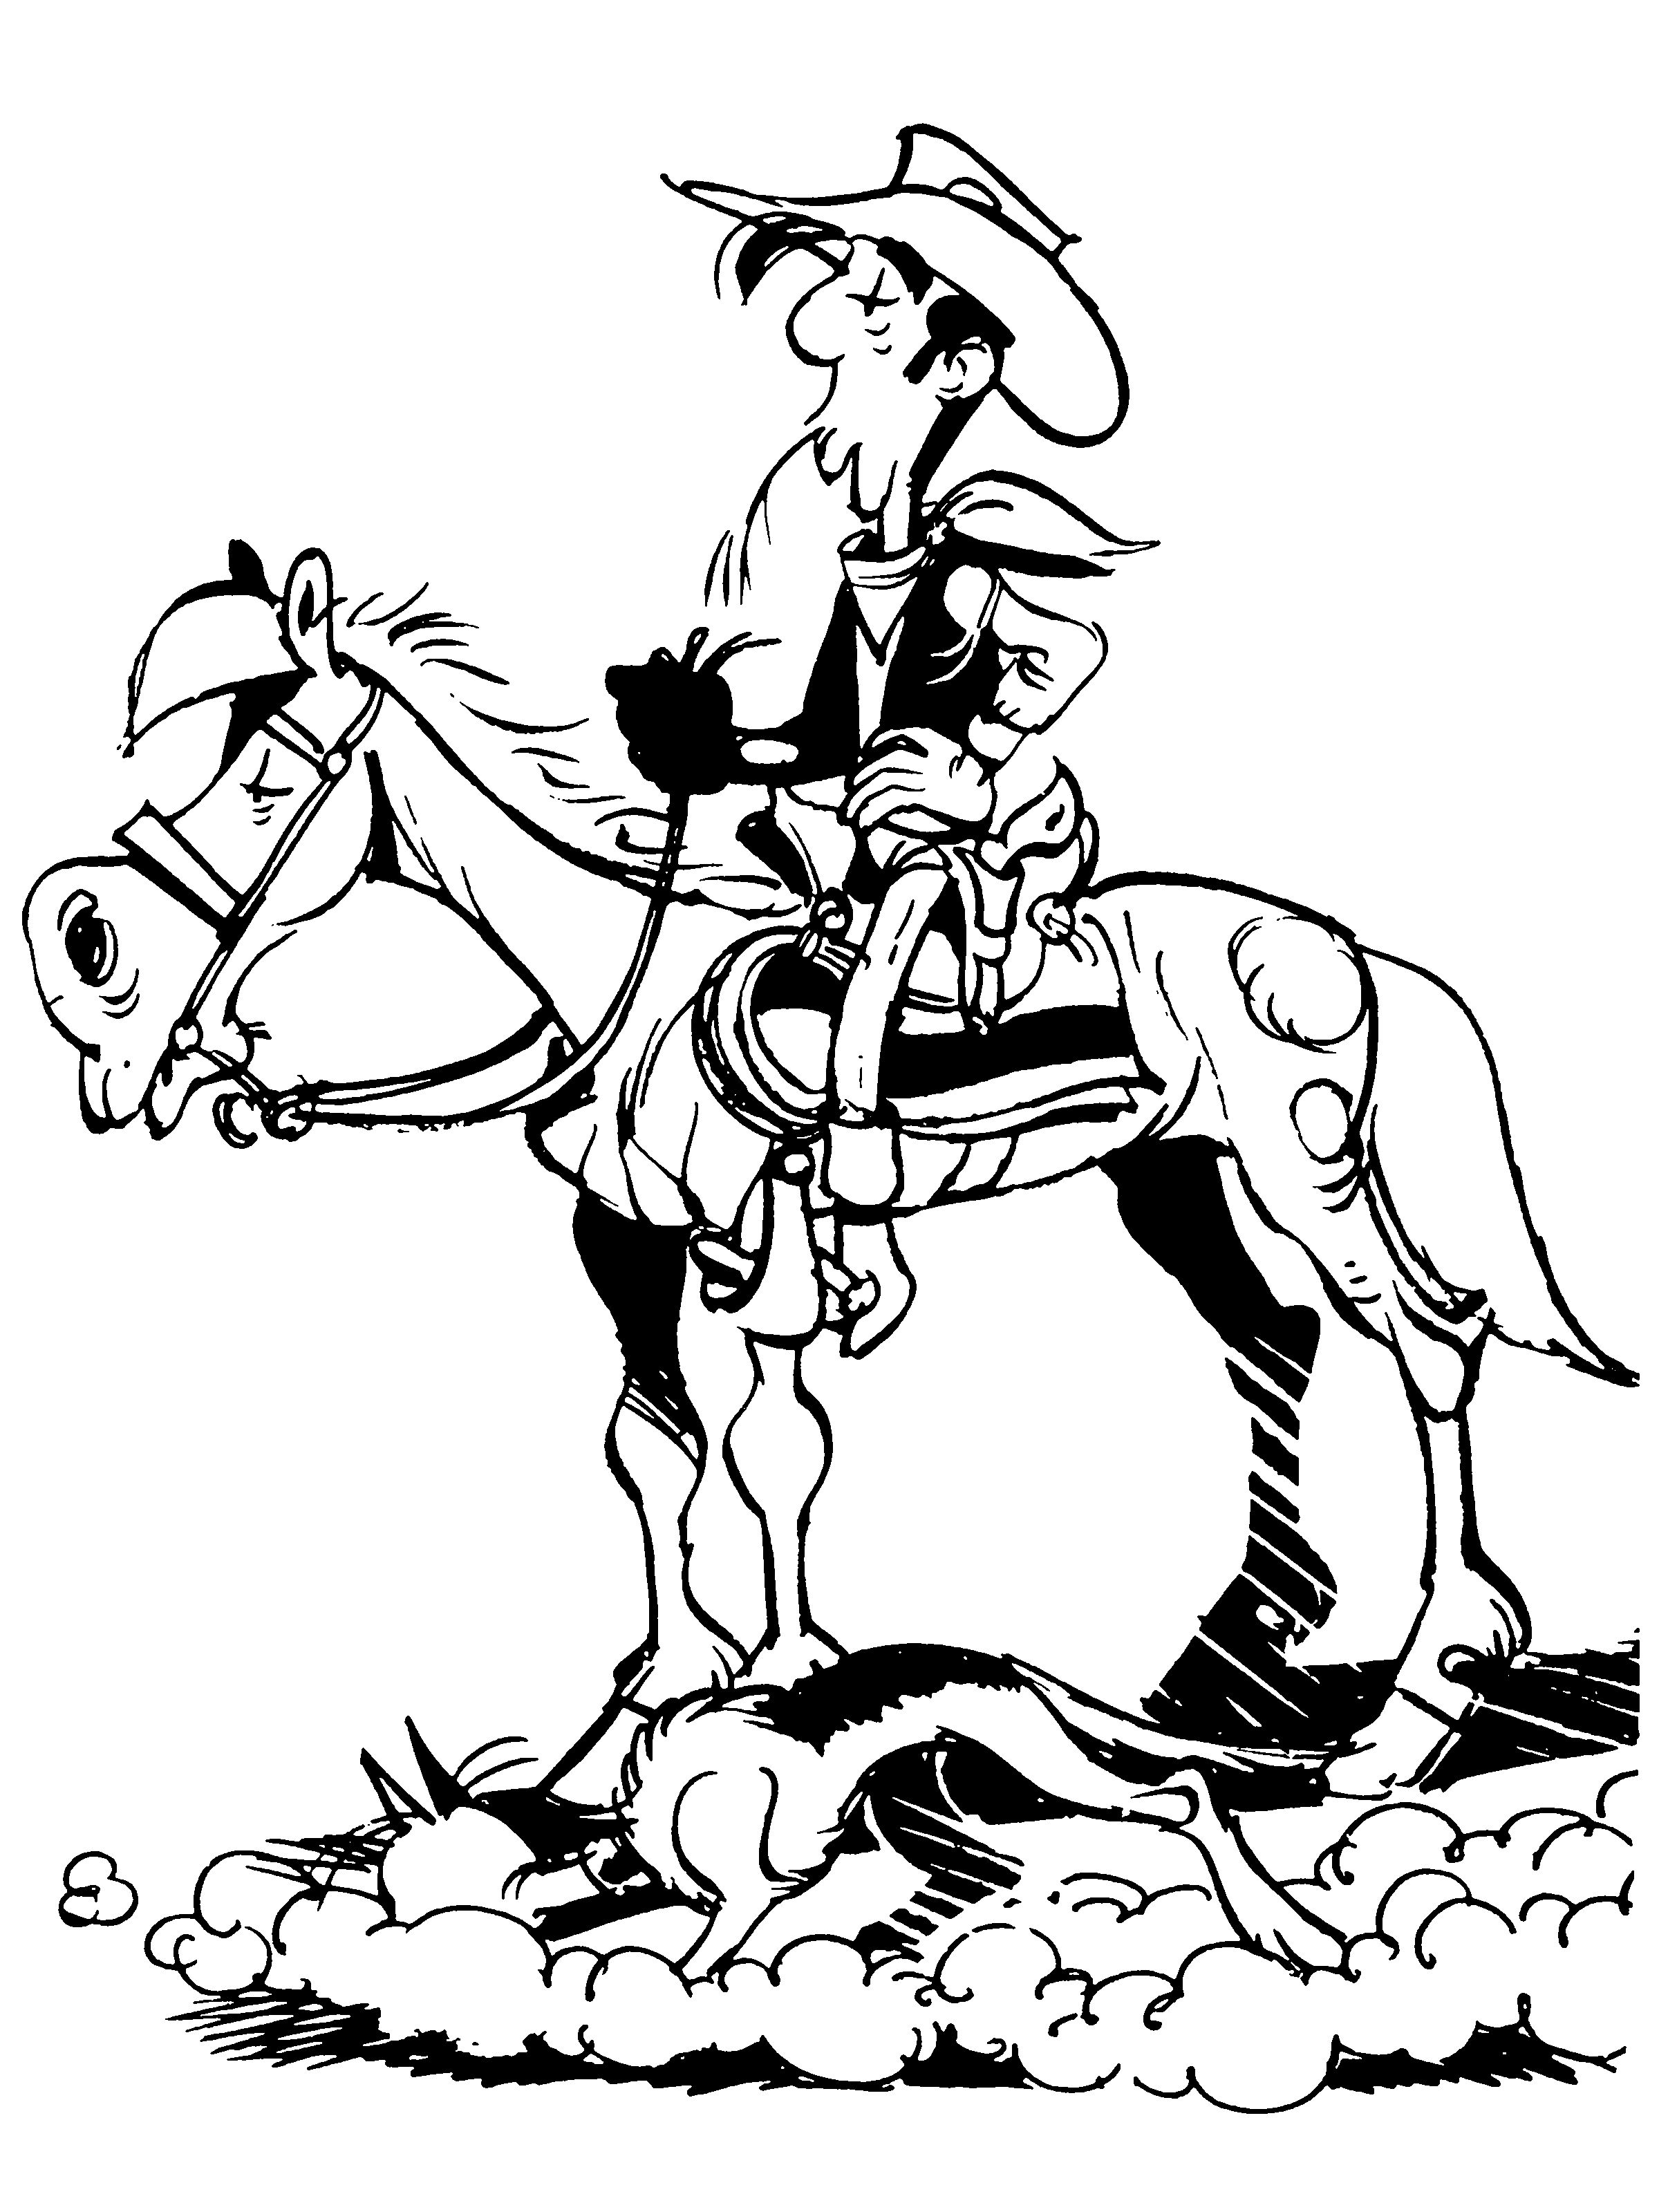 Lucky Luke Sauntering With Horse Coloring Pages For Kids #ghp ...